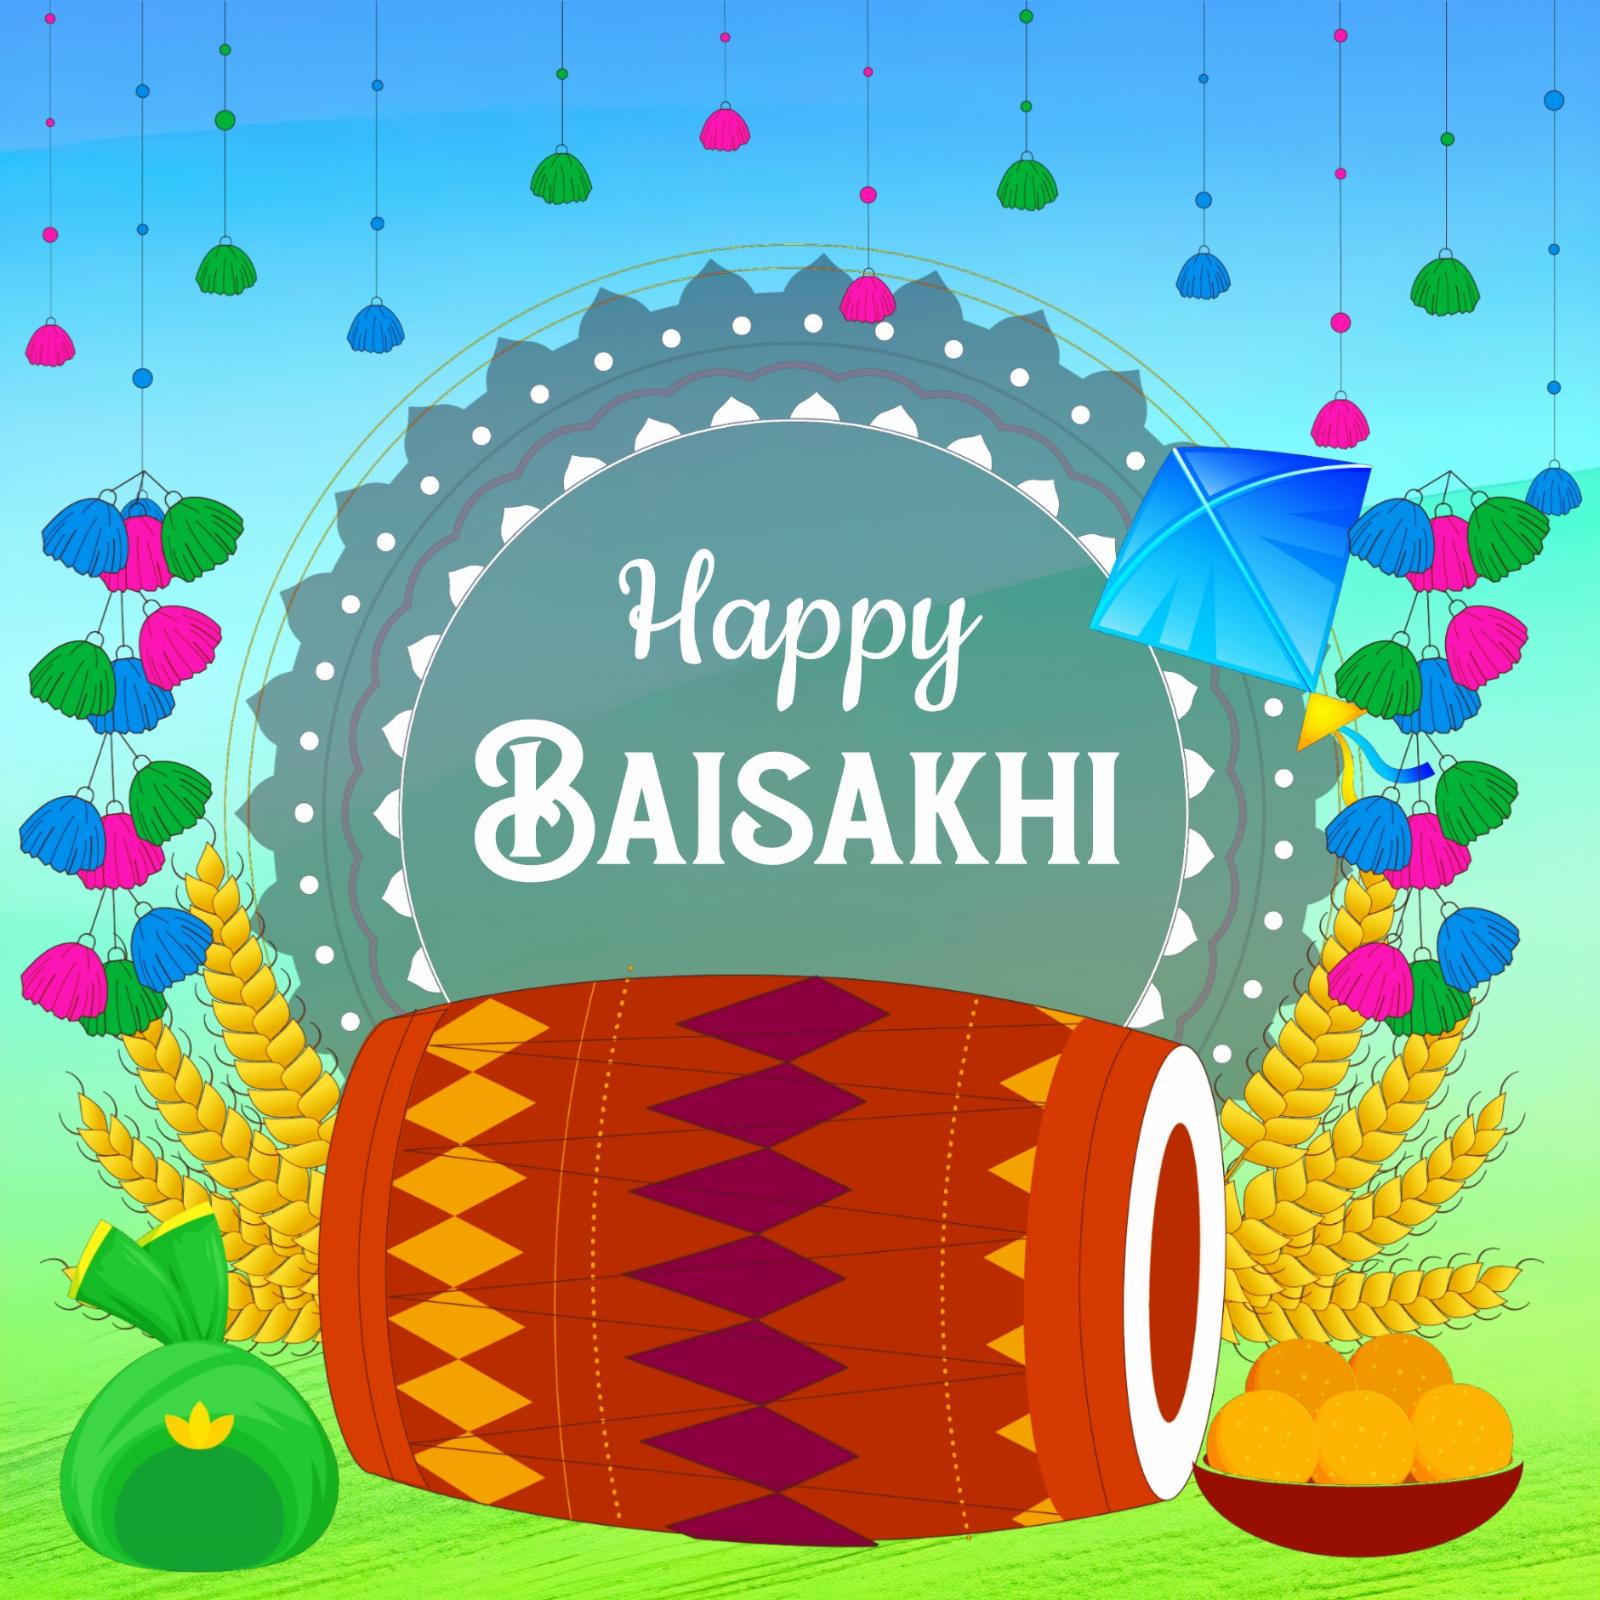 Happy Baisakhi Images For Whatsapp Dp Download